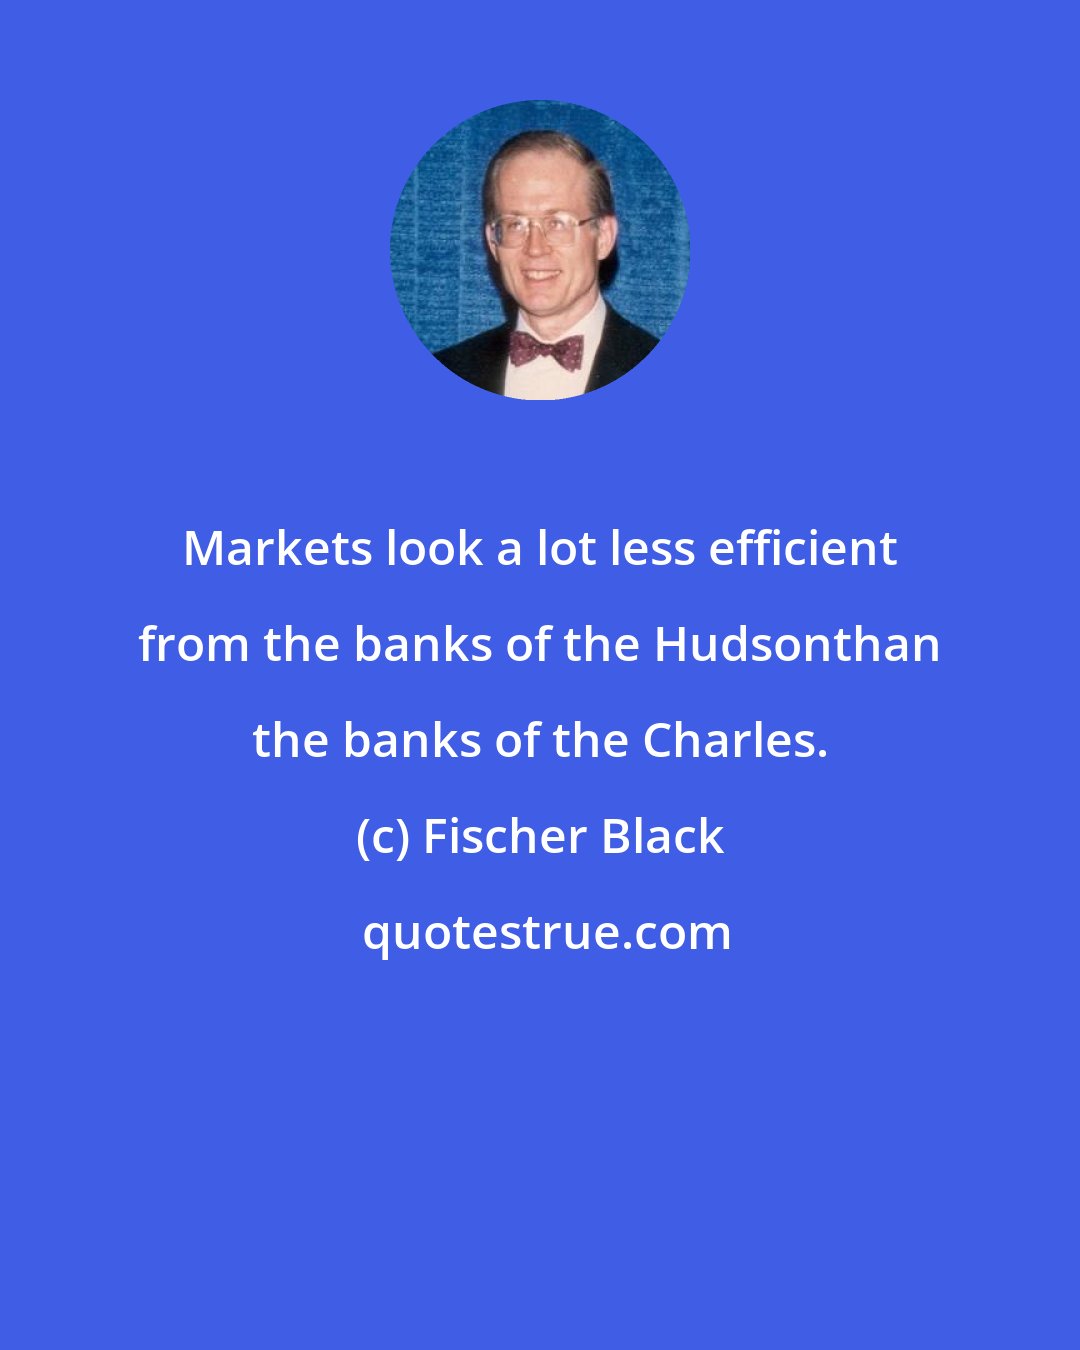 Fischer Black: Markets look a lot less efficient from the banks of the Hudsonthan the banks of the Charles.